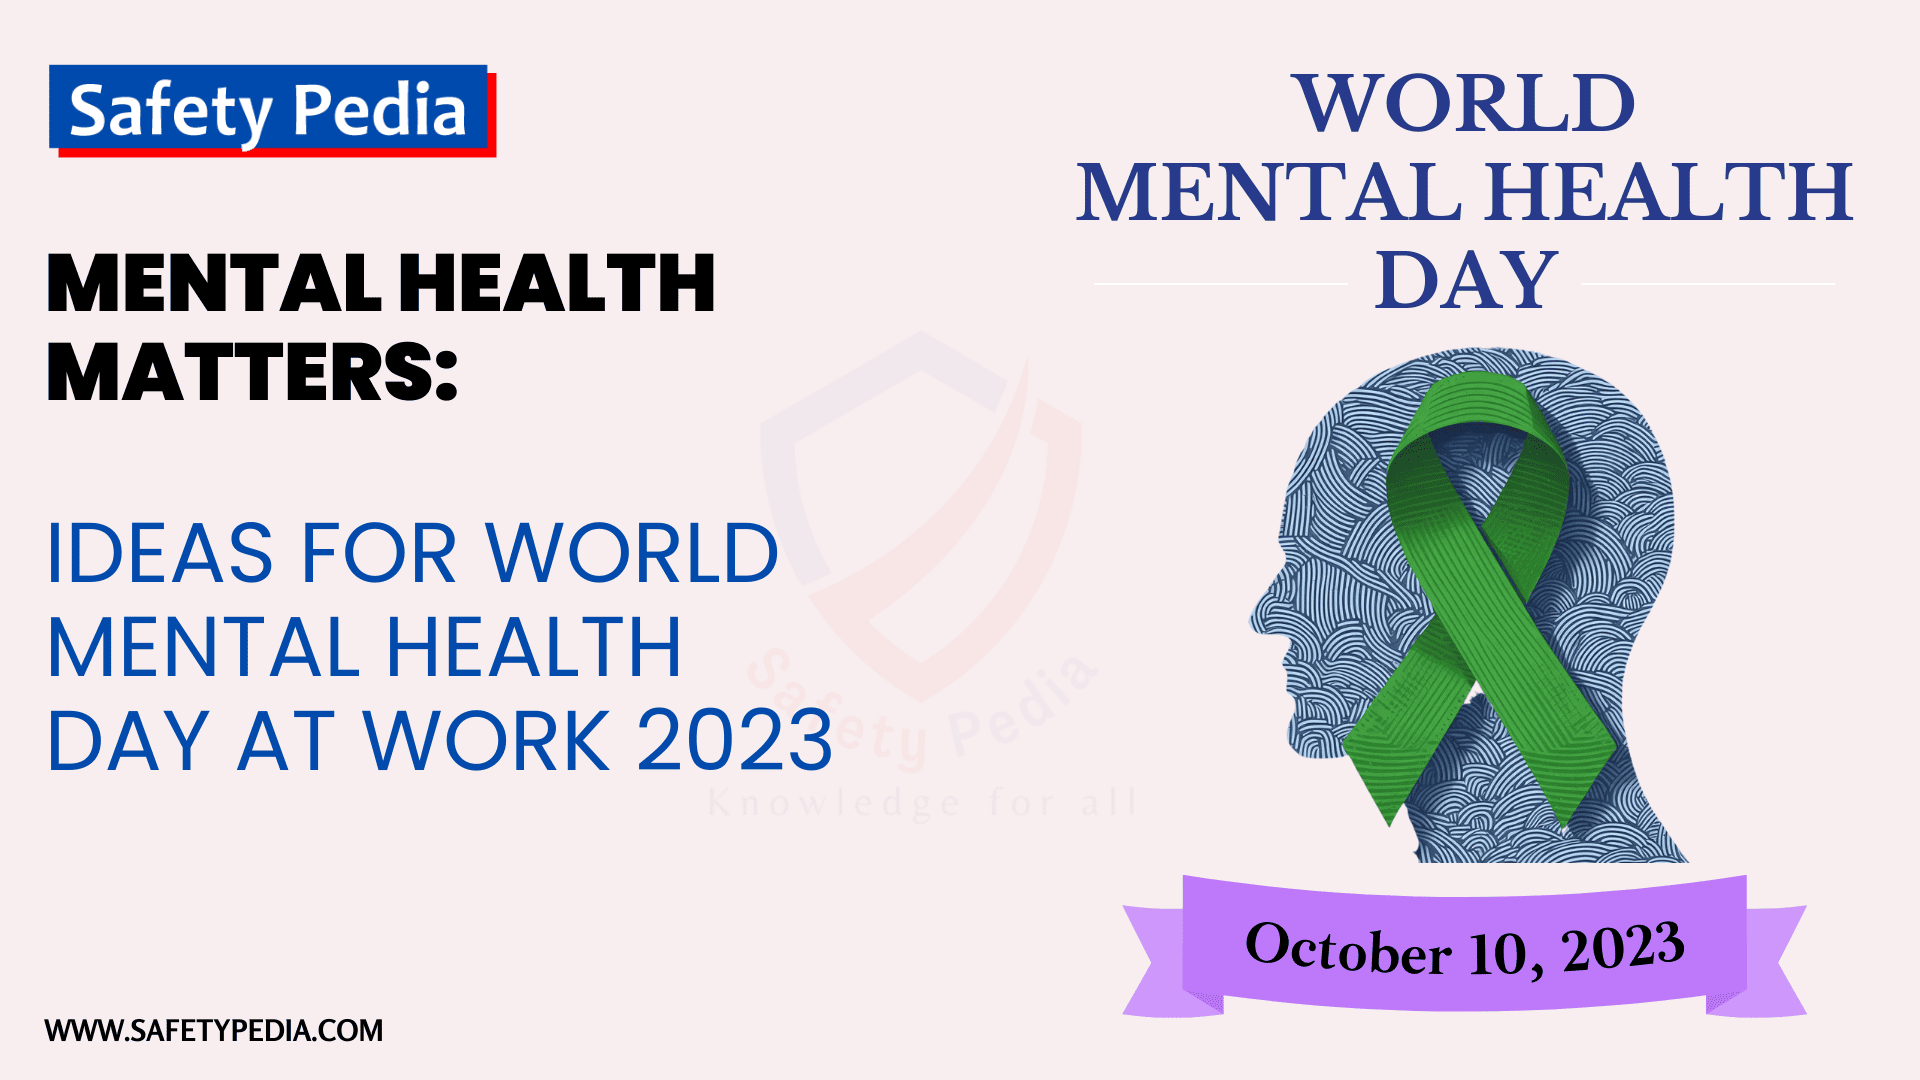 World Mental Health Day, Mental health matters. ideas for world mental health day at work and how to promote well-being, brain and head pictogram with green ribbon.